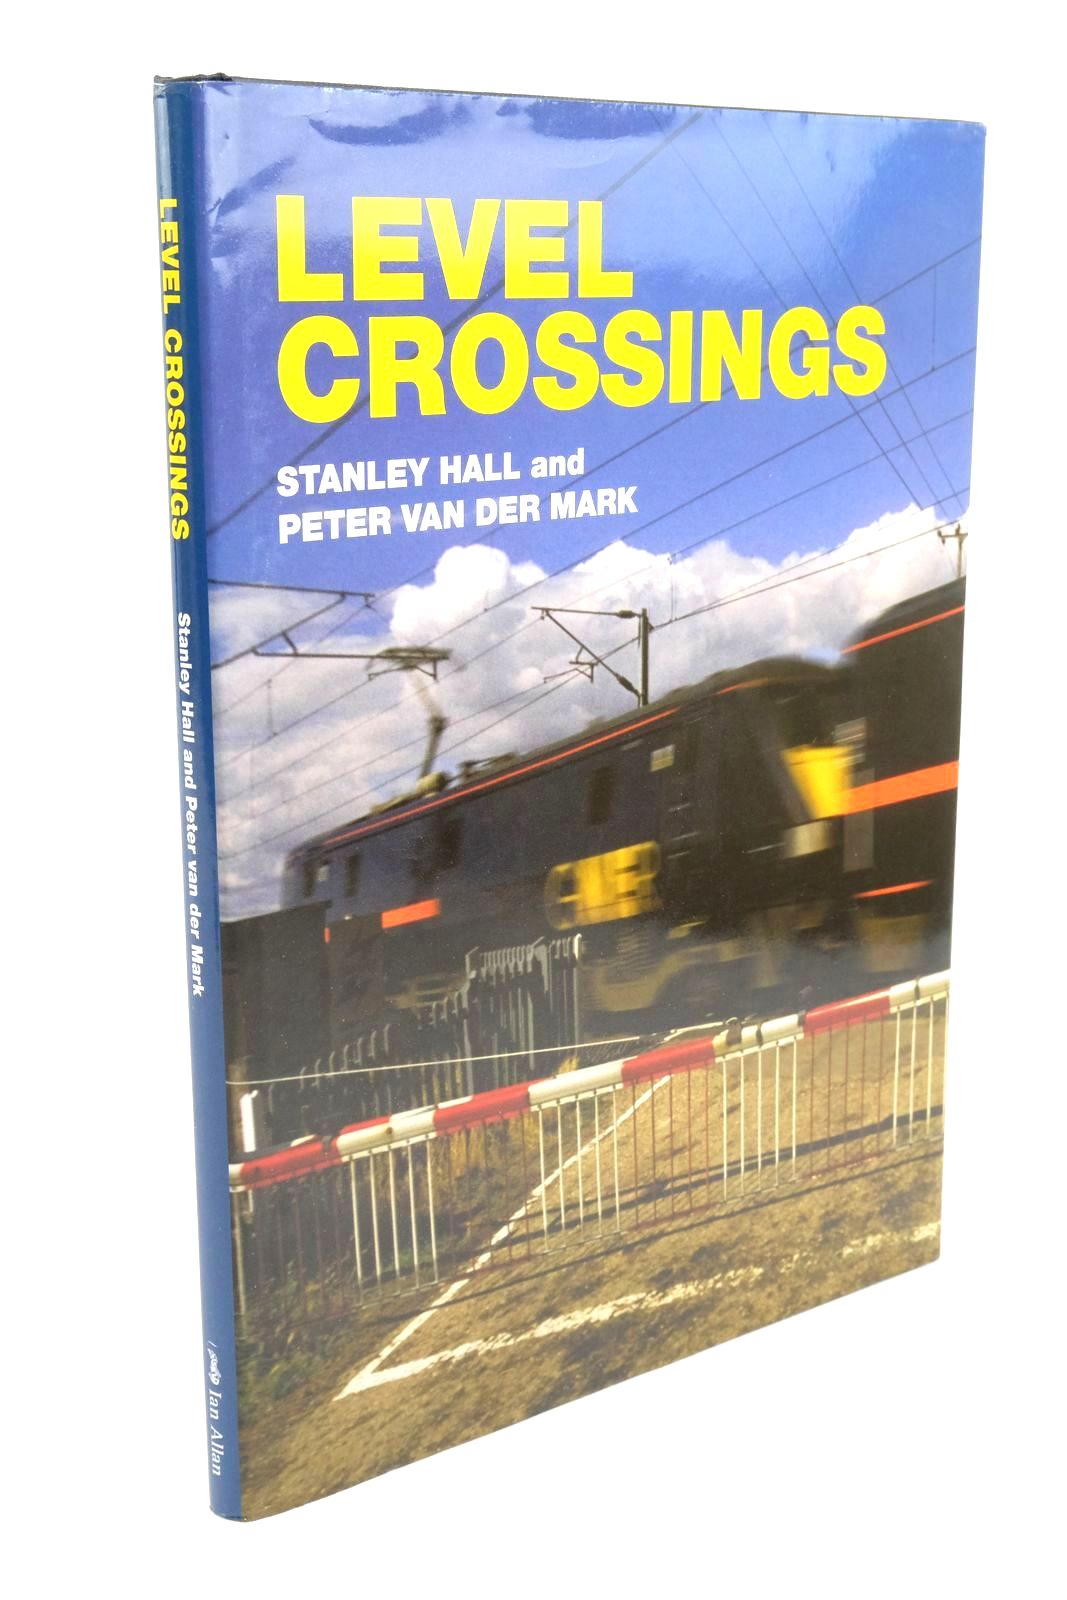 Photo of LEVEL CROSSINGS written by Hall, Stanley Van Der Mark, Peter published by Ian Allan Ltd. (STOCK CODE: 1322456)  for sale by Stella & Rose's Books